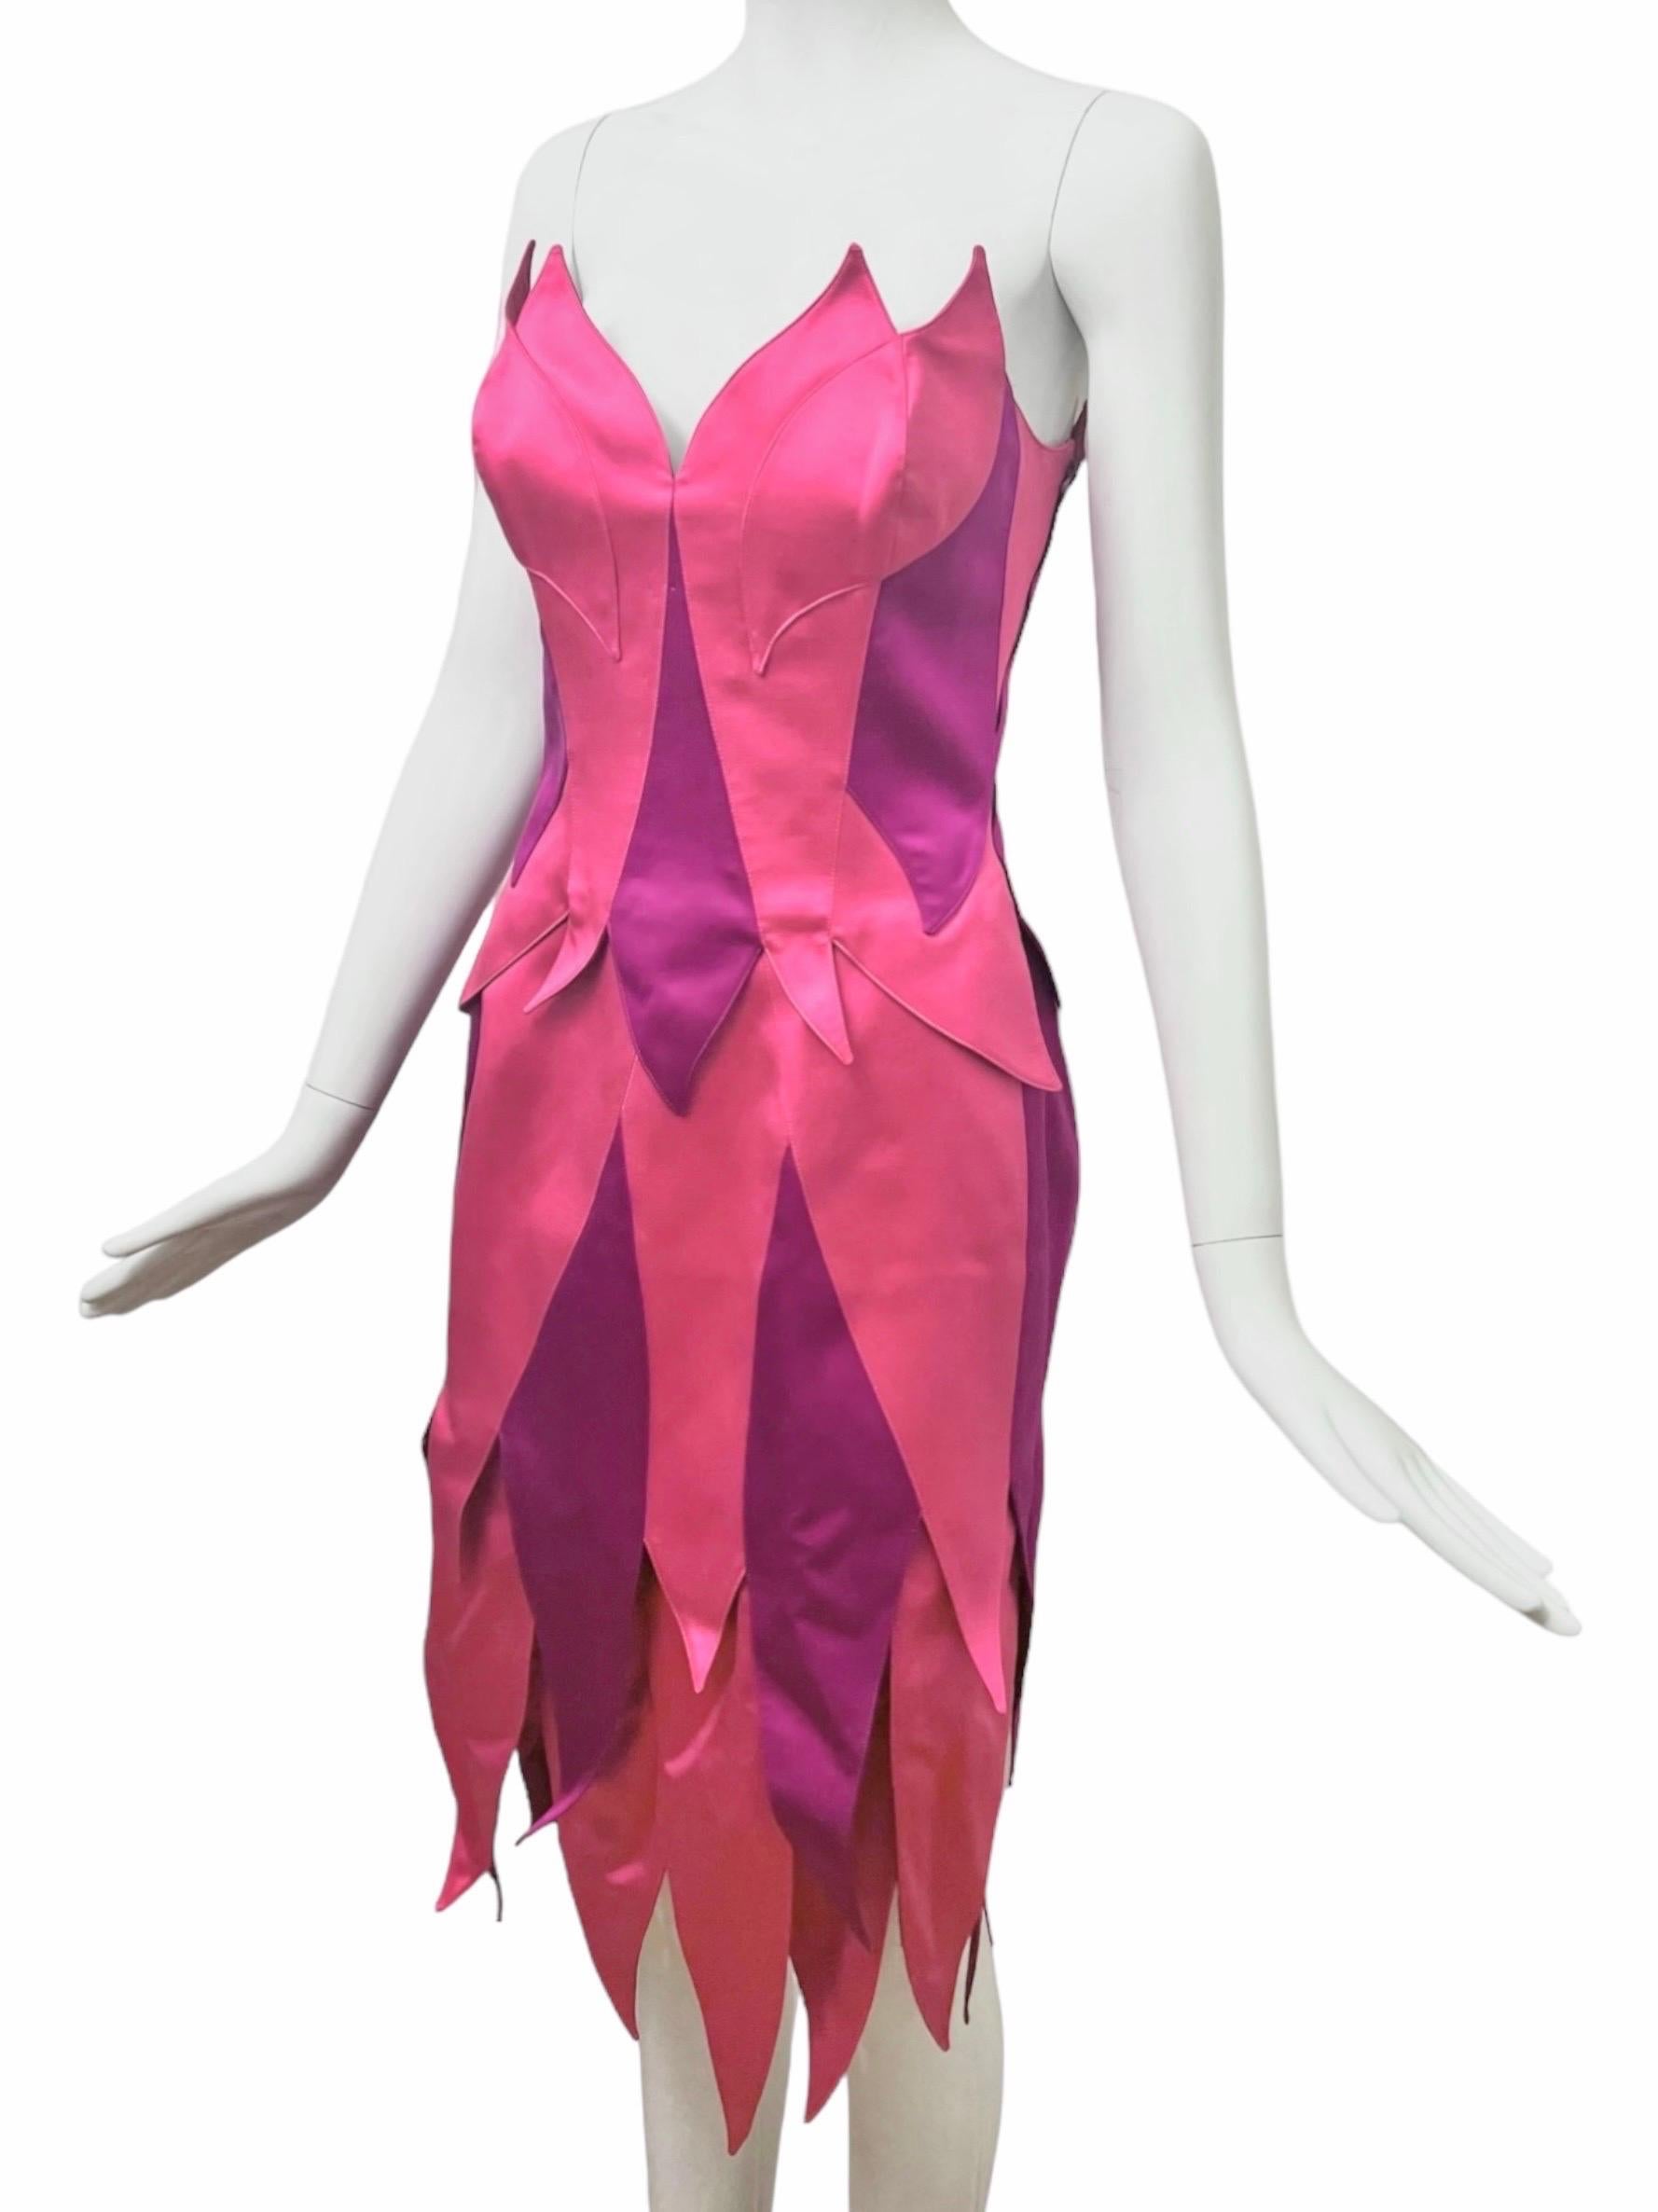 Create a statement in this enchanting Thierry Mugler Couture bustier and skirt ensemble. This rare silk two piece ensemble features a striking colorblock pattern in rich and vibrant shades of pink and violet resemblant to a fairy. 

Constructed with